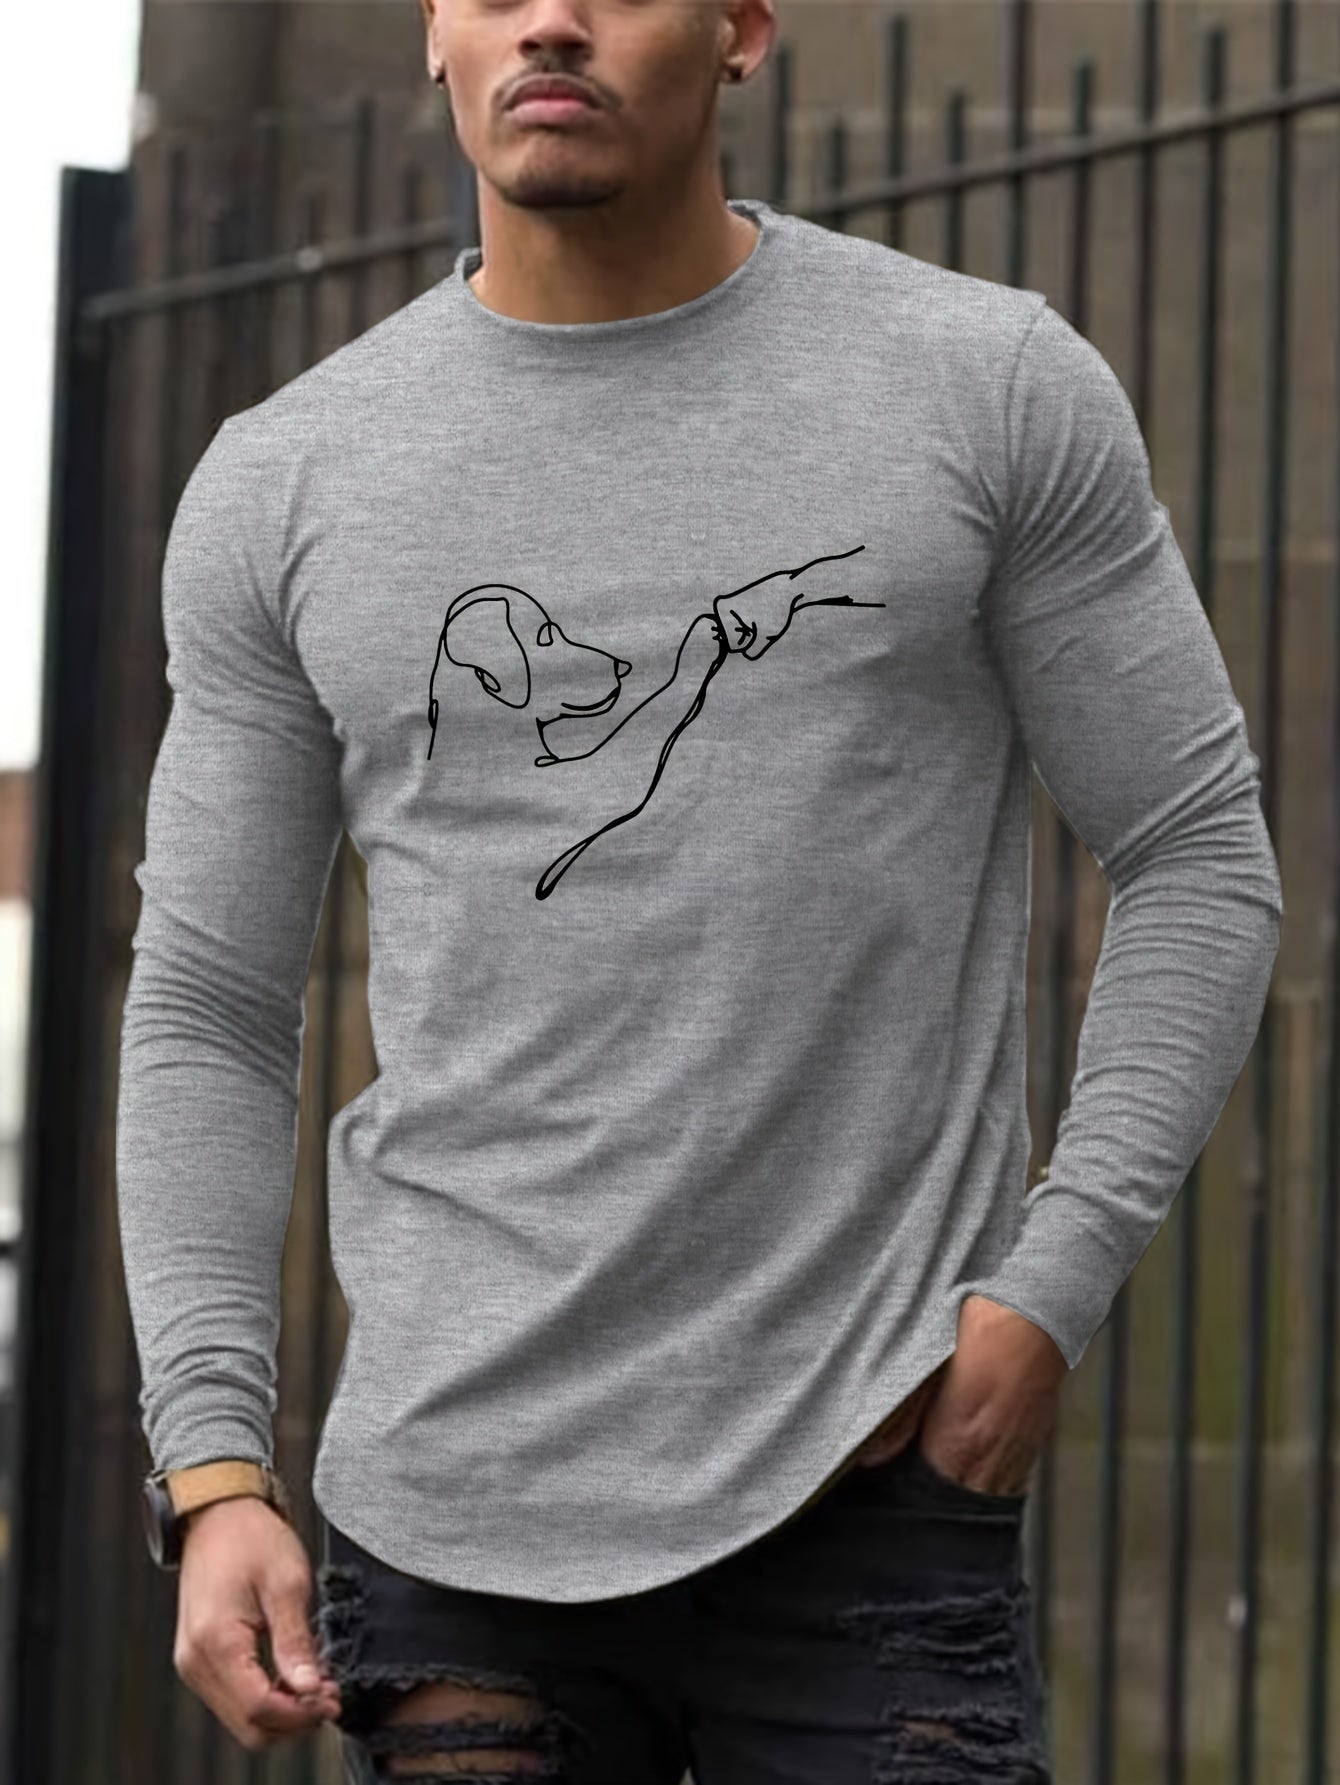 Simple Dog Print Men's Long Sleeve Fit T-shirt For Spring Fall, Men's All-match Crew Neck Tops